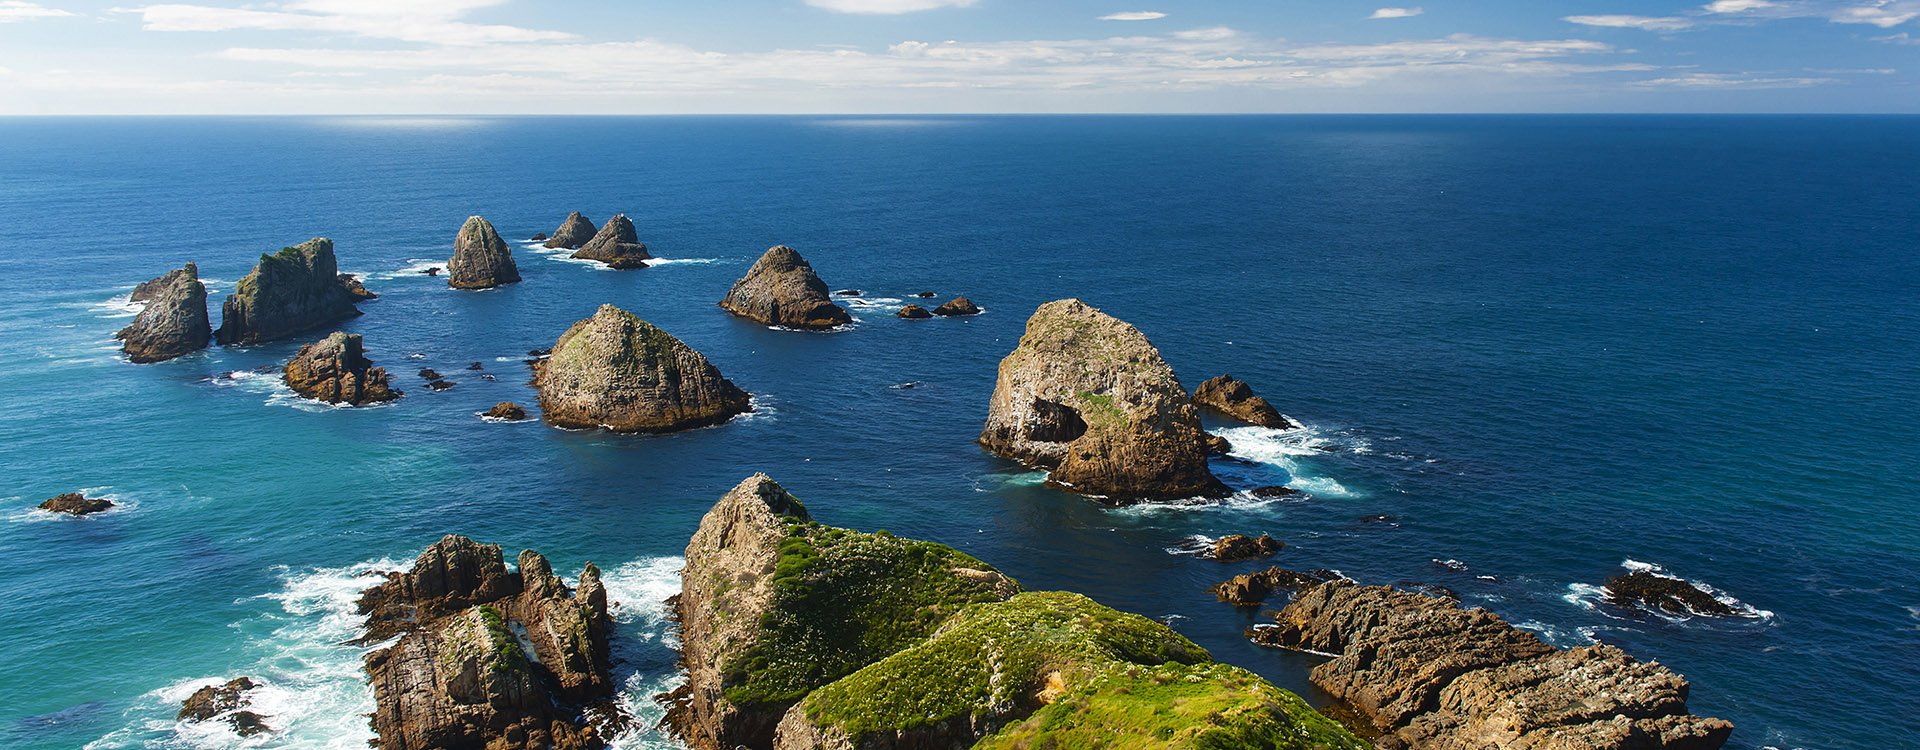 Nugget Point is located in the Catlins area on the Southern Coast of New Zealand, Otago region